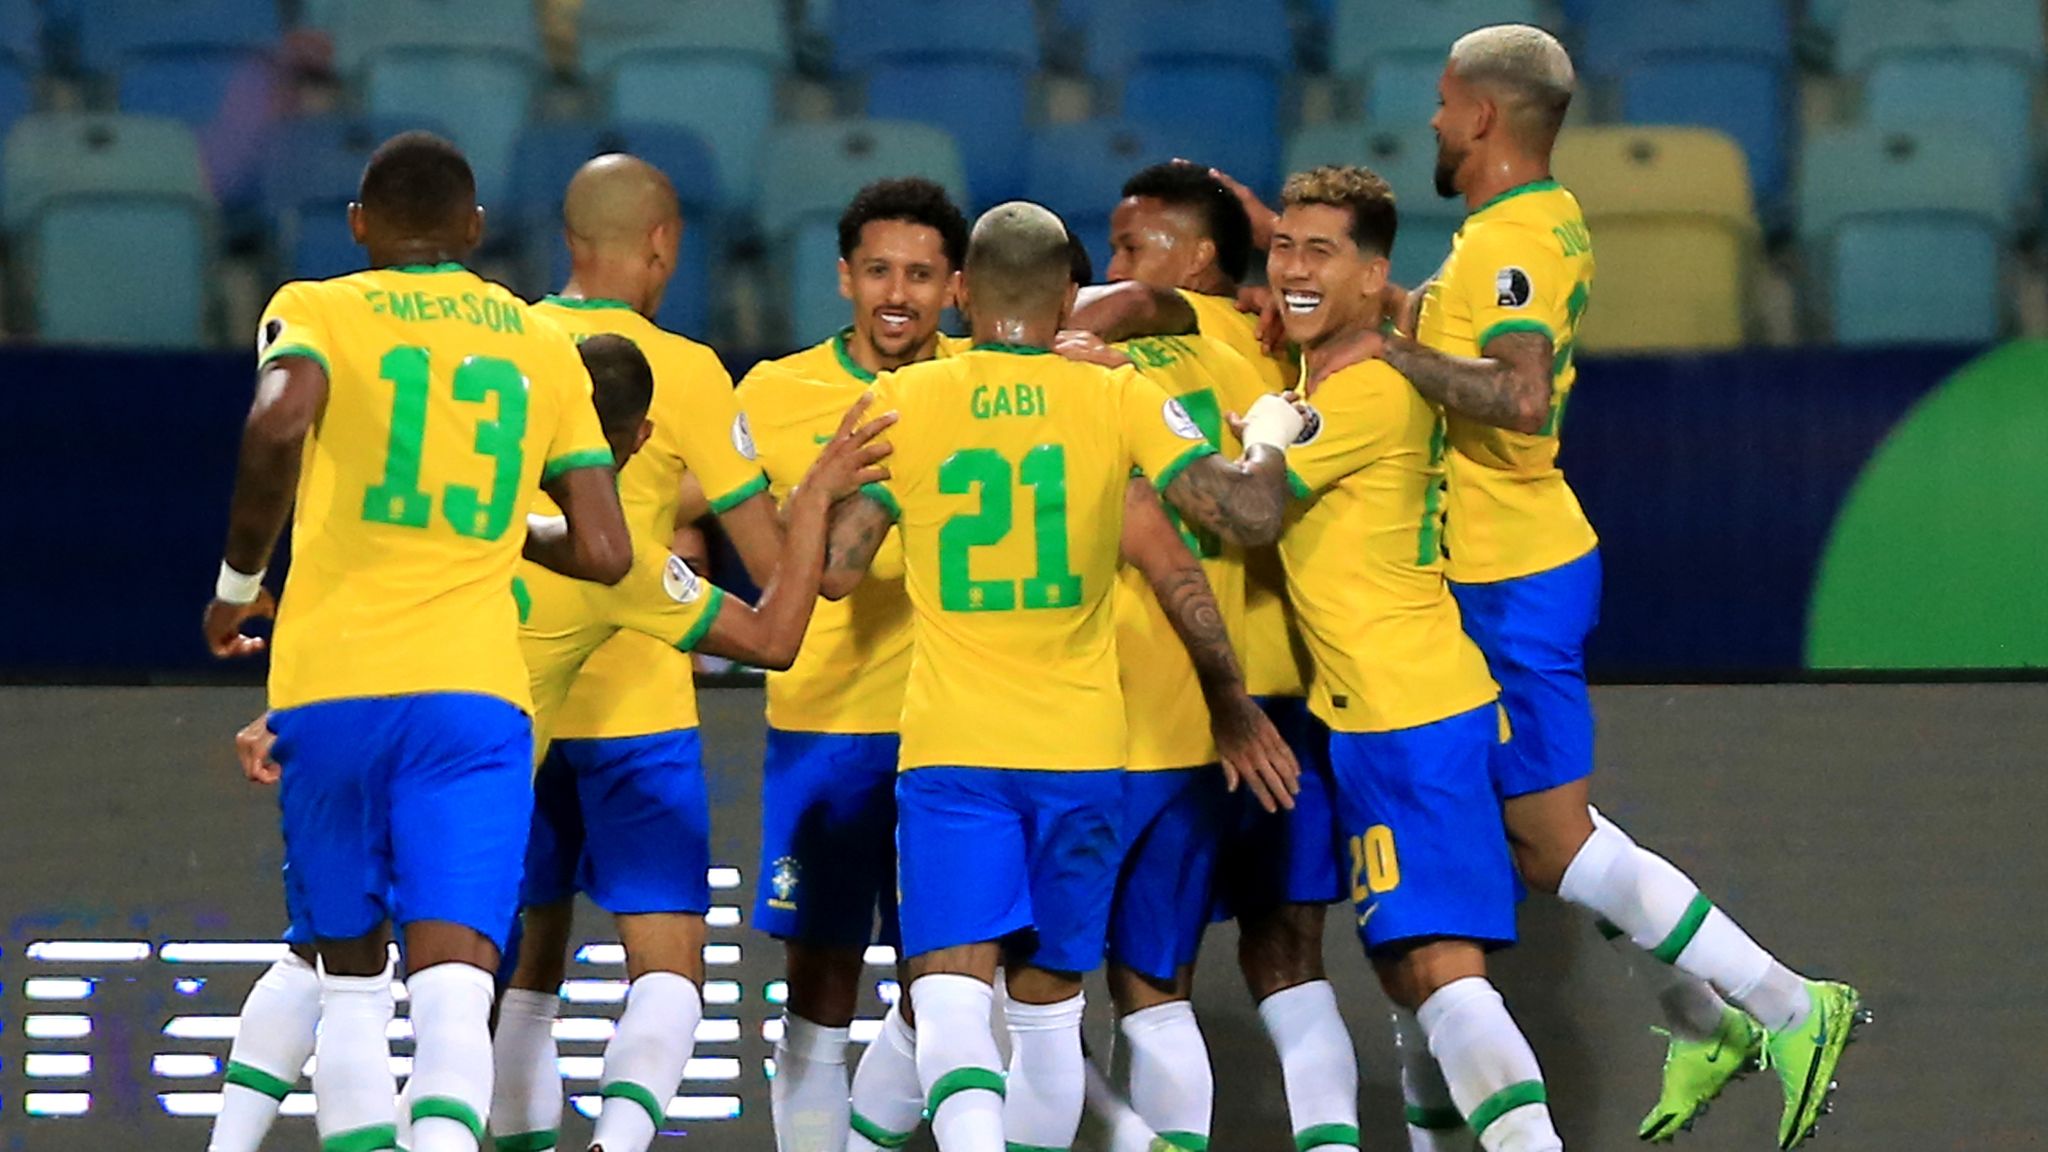 Brazil vs Chile LIVE: When and where to watch FIFA World Cup Qualifiers Live streaming? Get Team News, Predicted Lineups and Live Telecast details